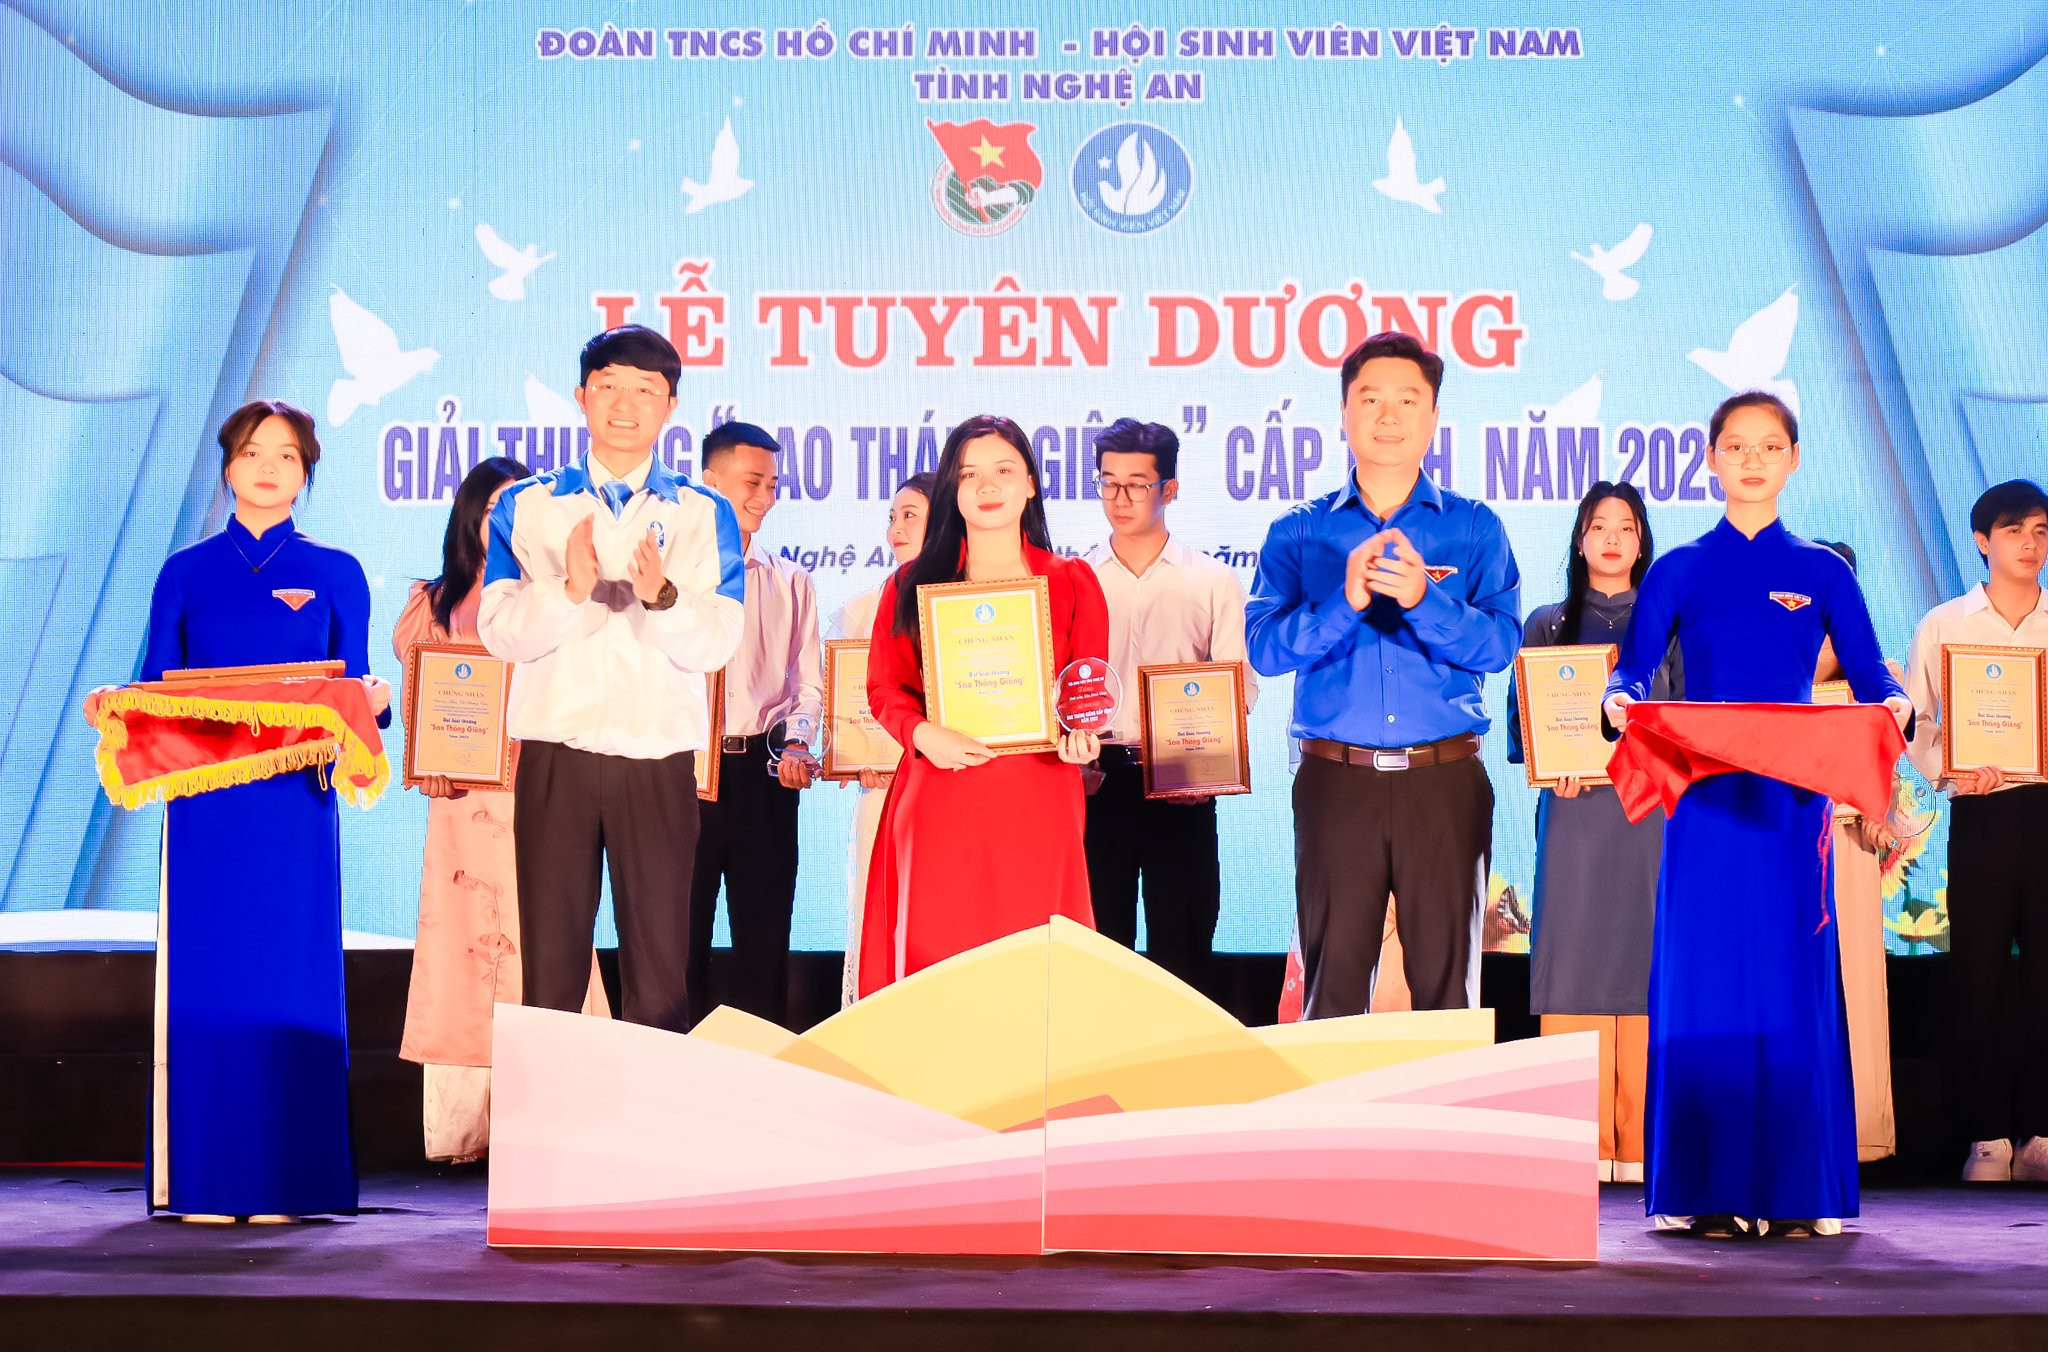 bna-trao-chon-anh-thanh-le-6995.jpg